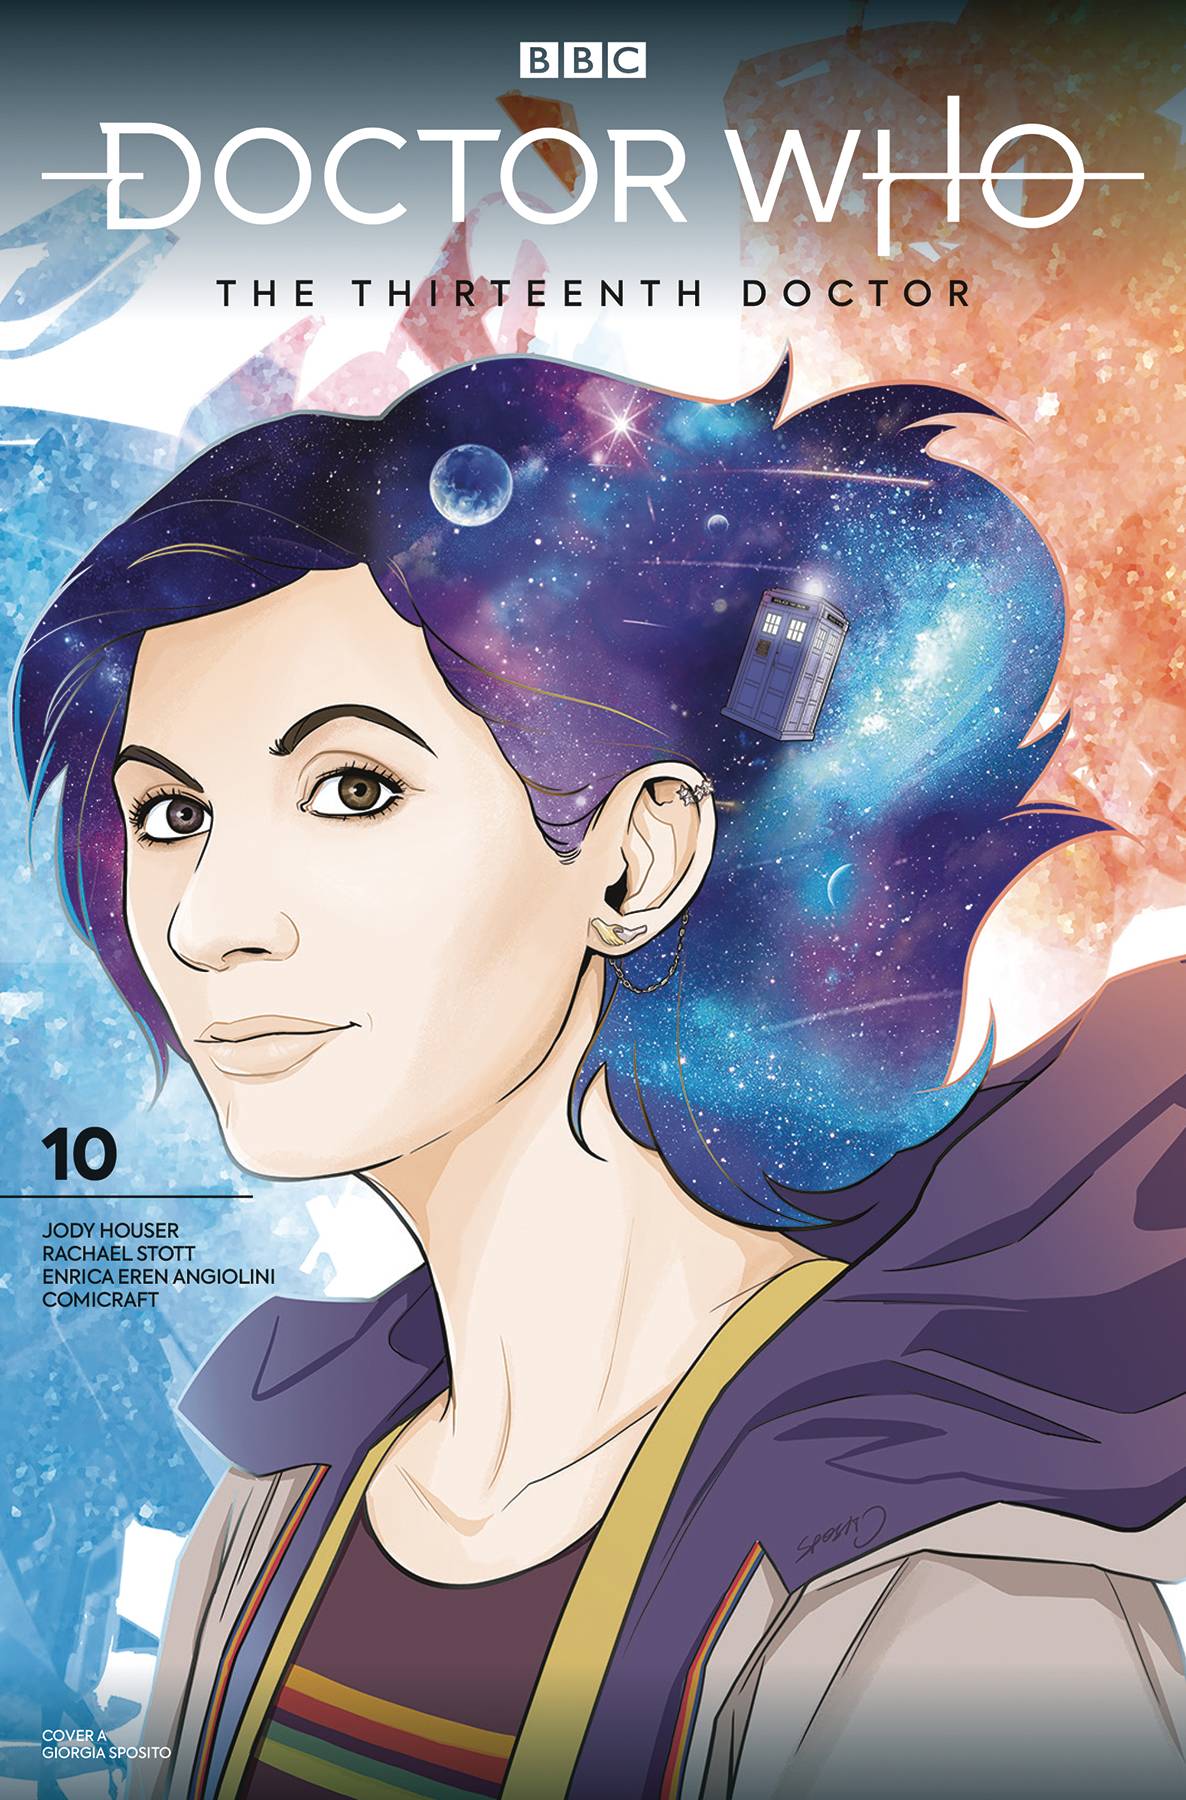 DOCTOR WHO 13TH #10 CVR A SPOSITO